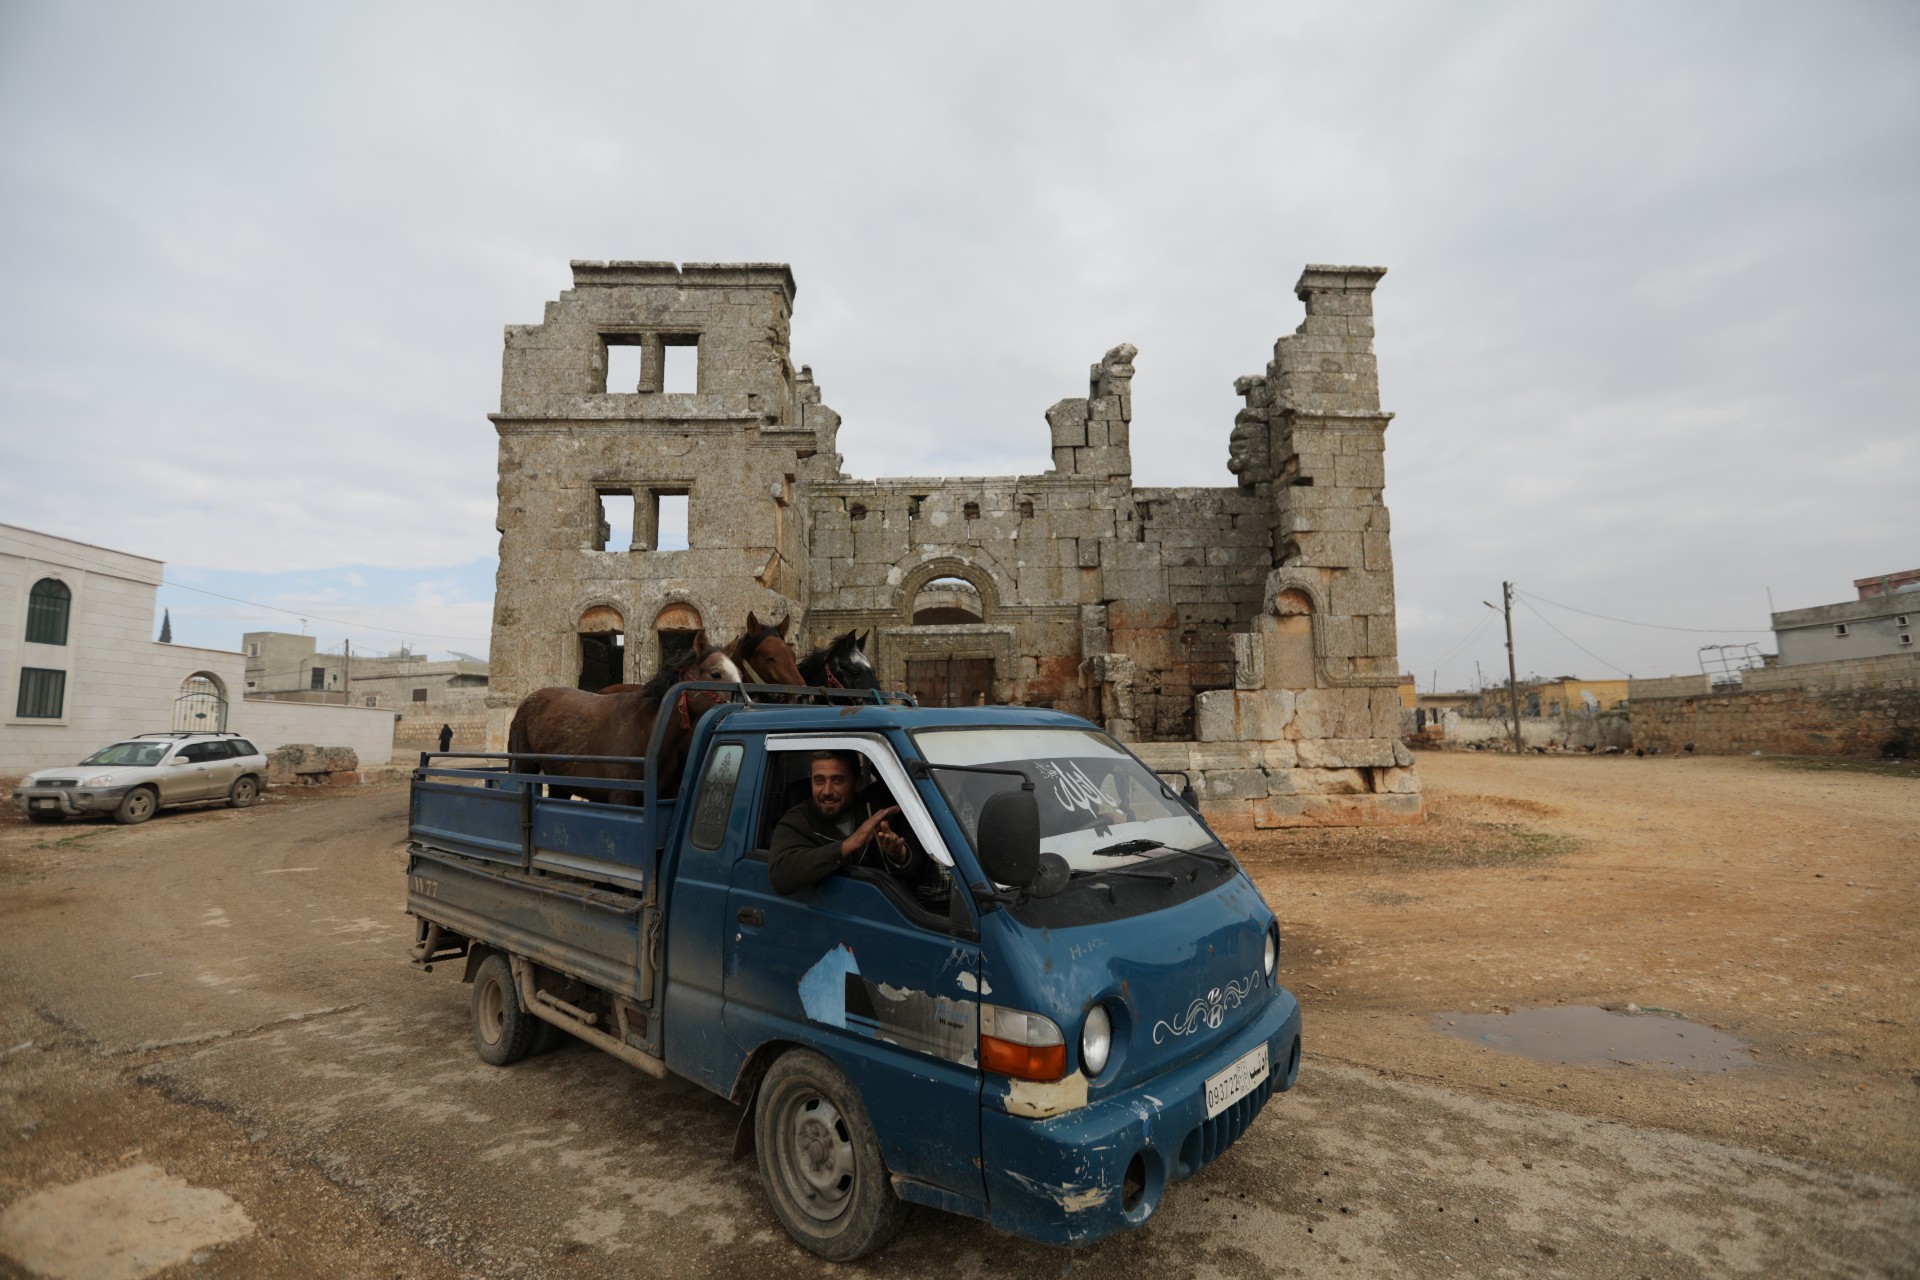 A man driving a truck carrying horses passes in front of the ancient Qalb Loze Church, Syria (Reuters)